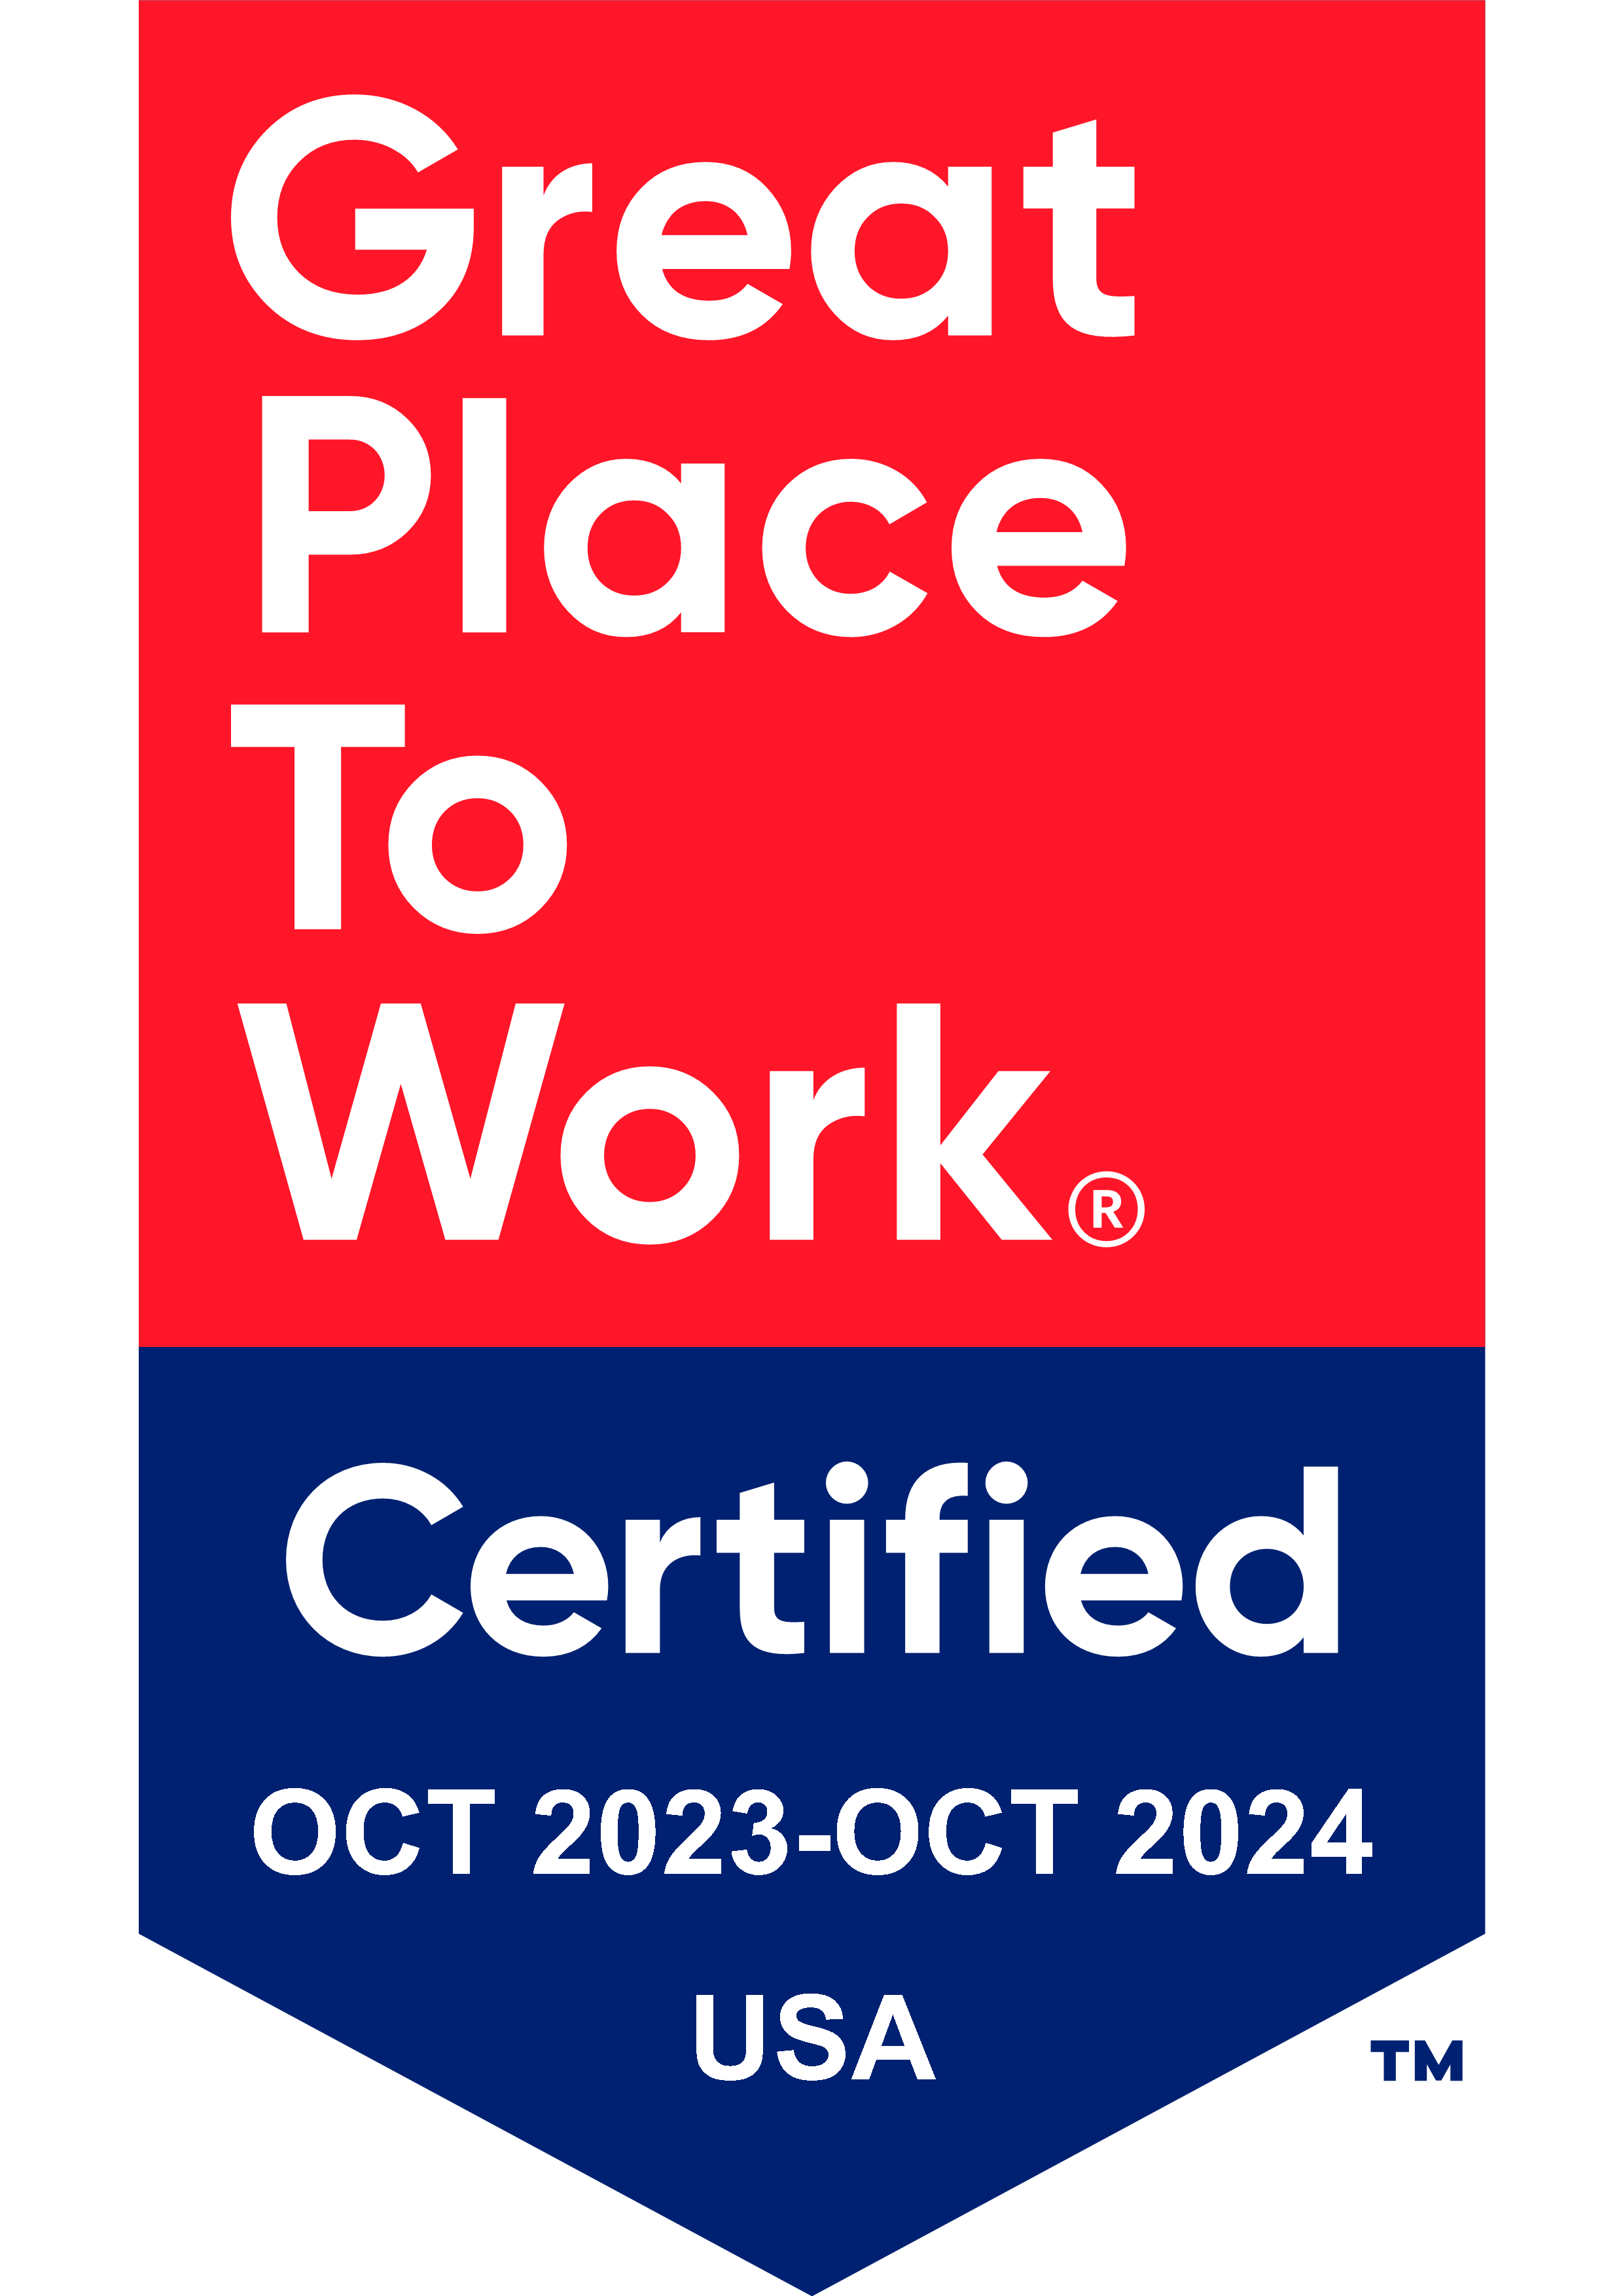 Great Place To Work® - Certified October 2023-October 2024 USA